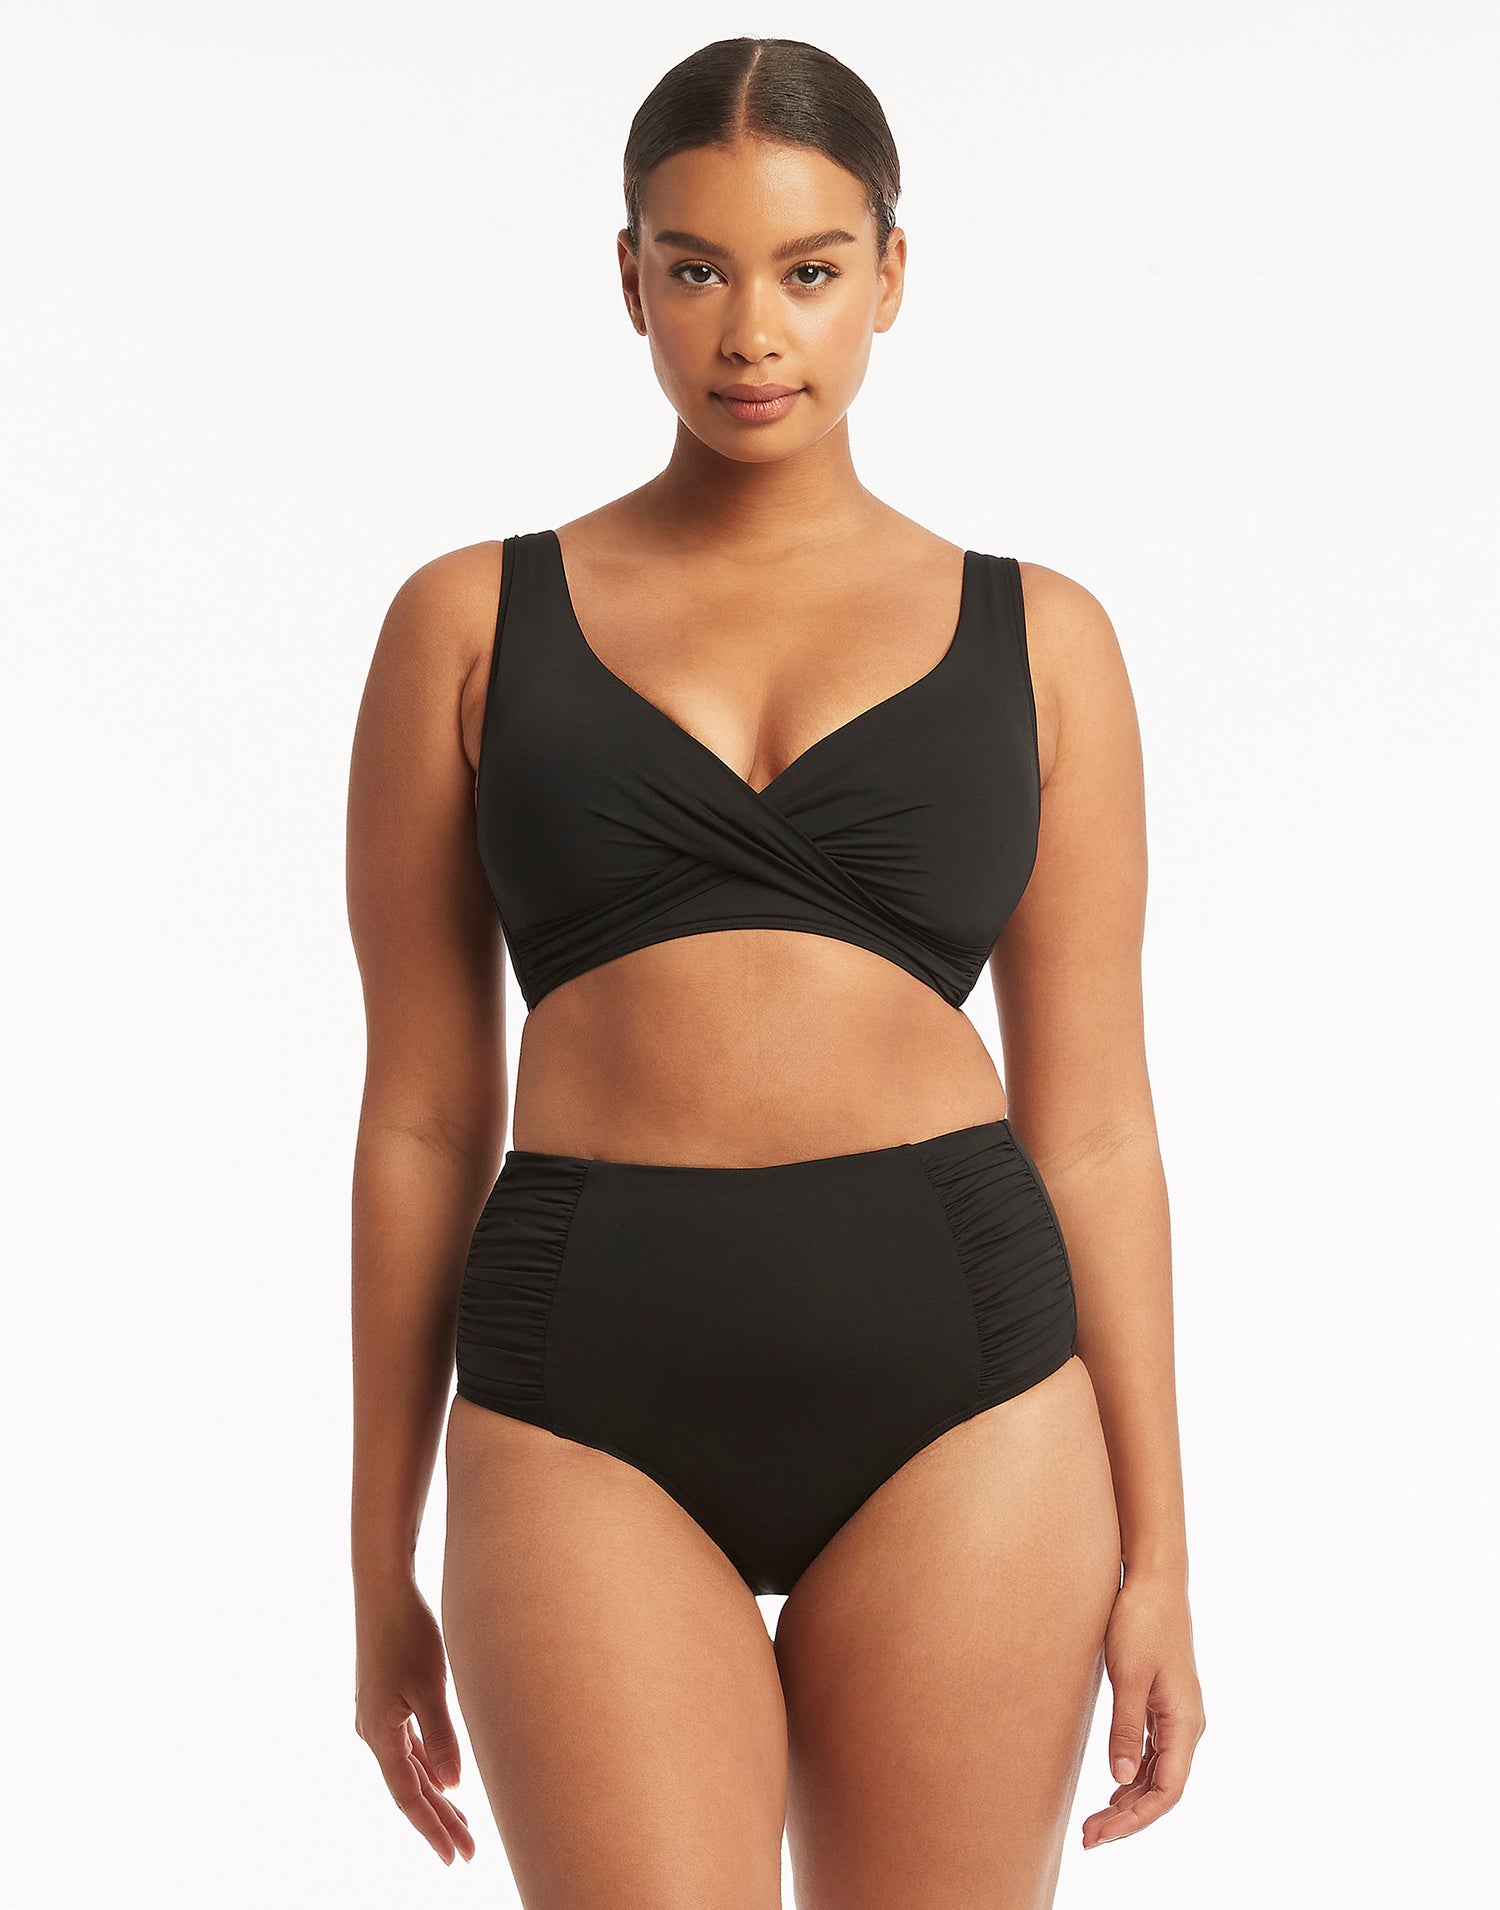 Essentials Multifit Halter Top by Sea Level in Black - Front View